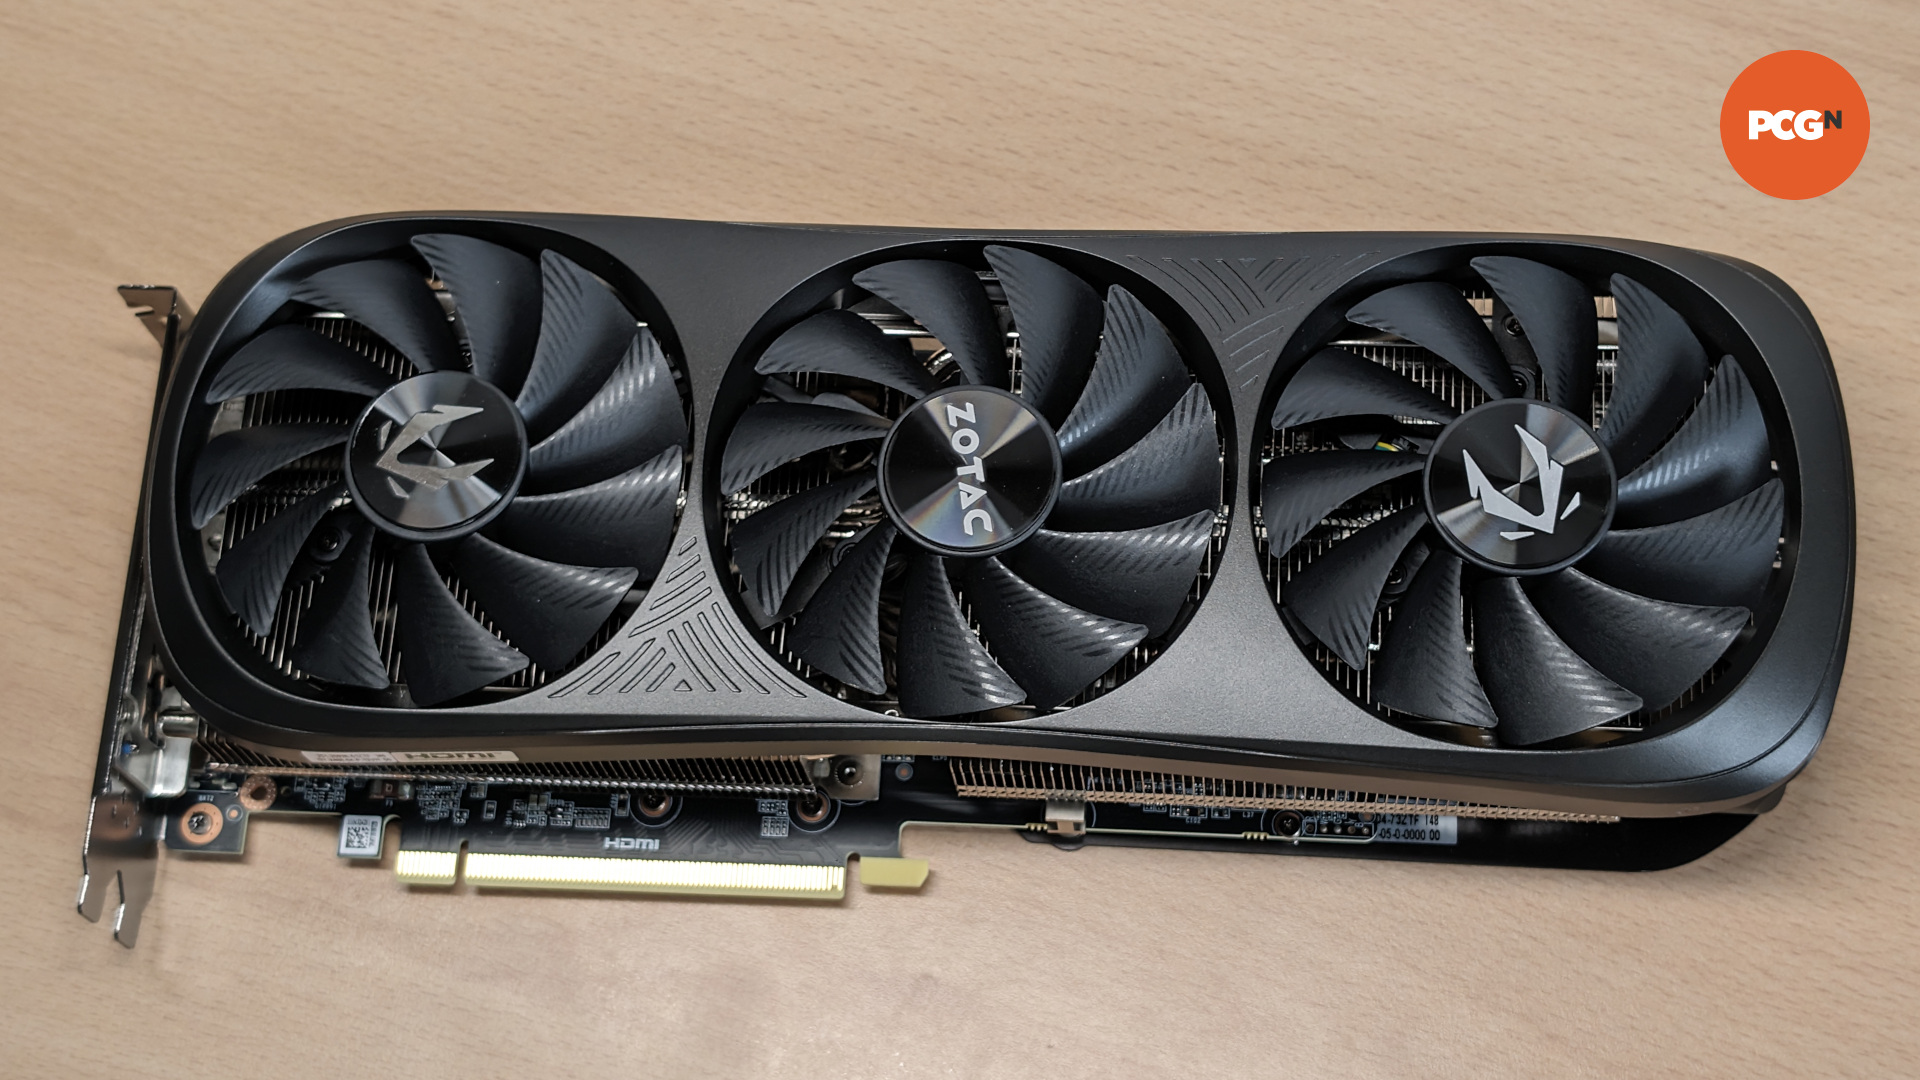 The Nvidia GeForce RTX 4070 Ti Super graphics card against a wooden background